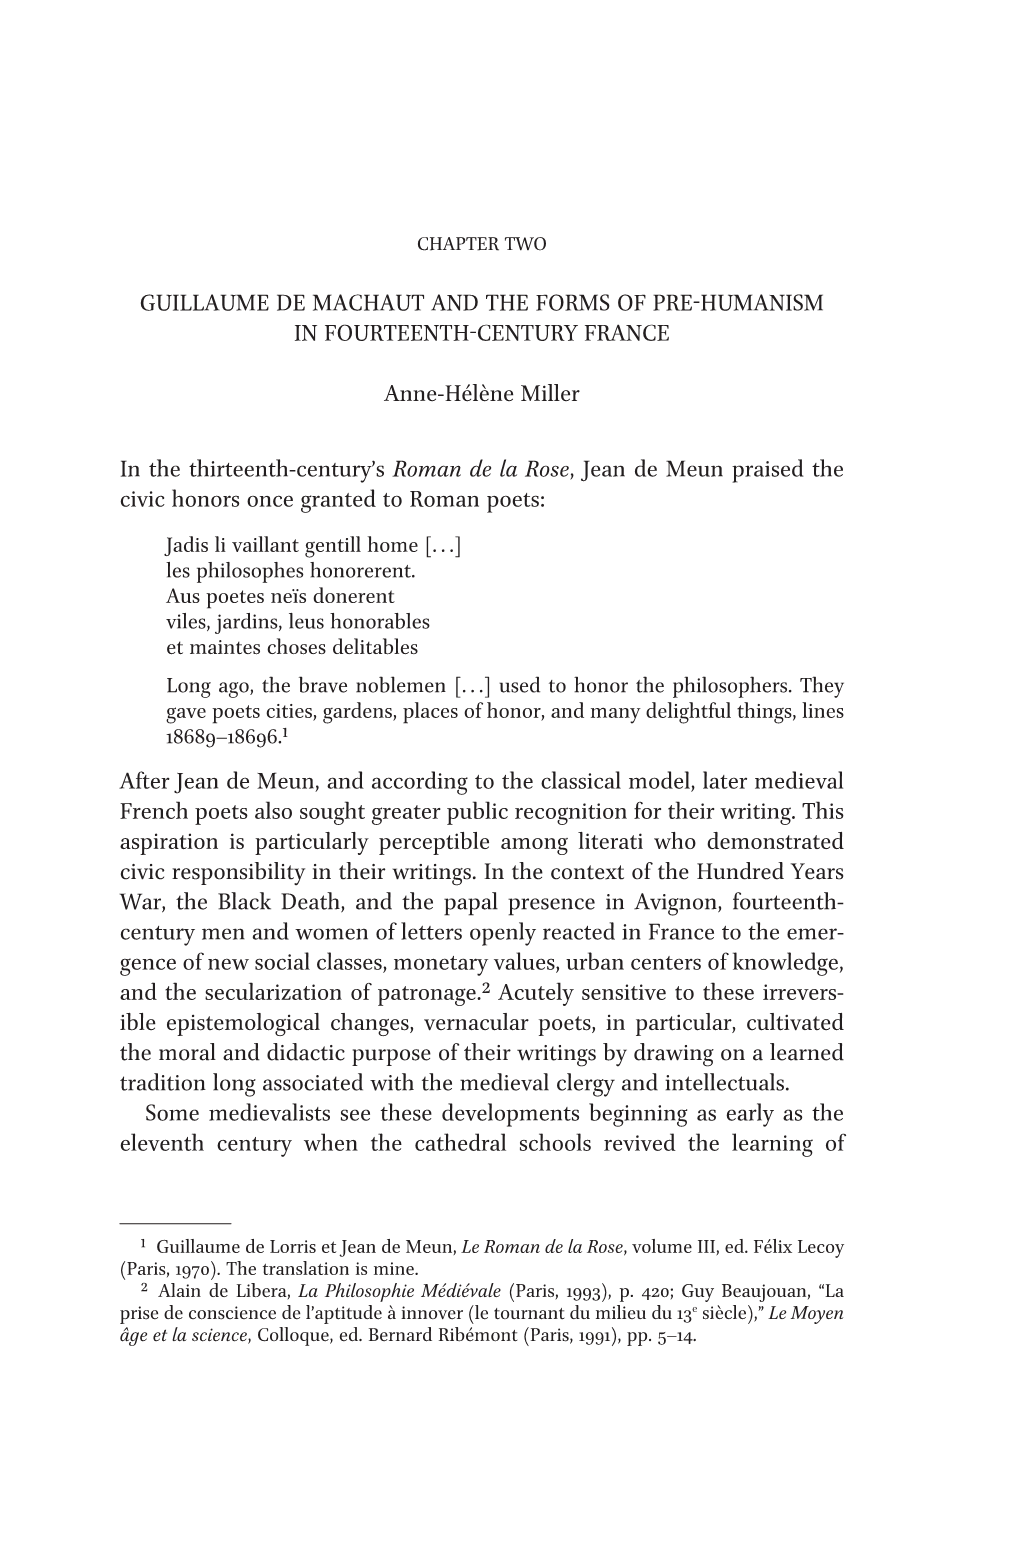 Guillaume De Machaut and the Forms of Pre-Humanism in Fourteenth-Century France